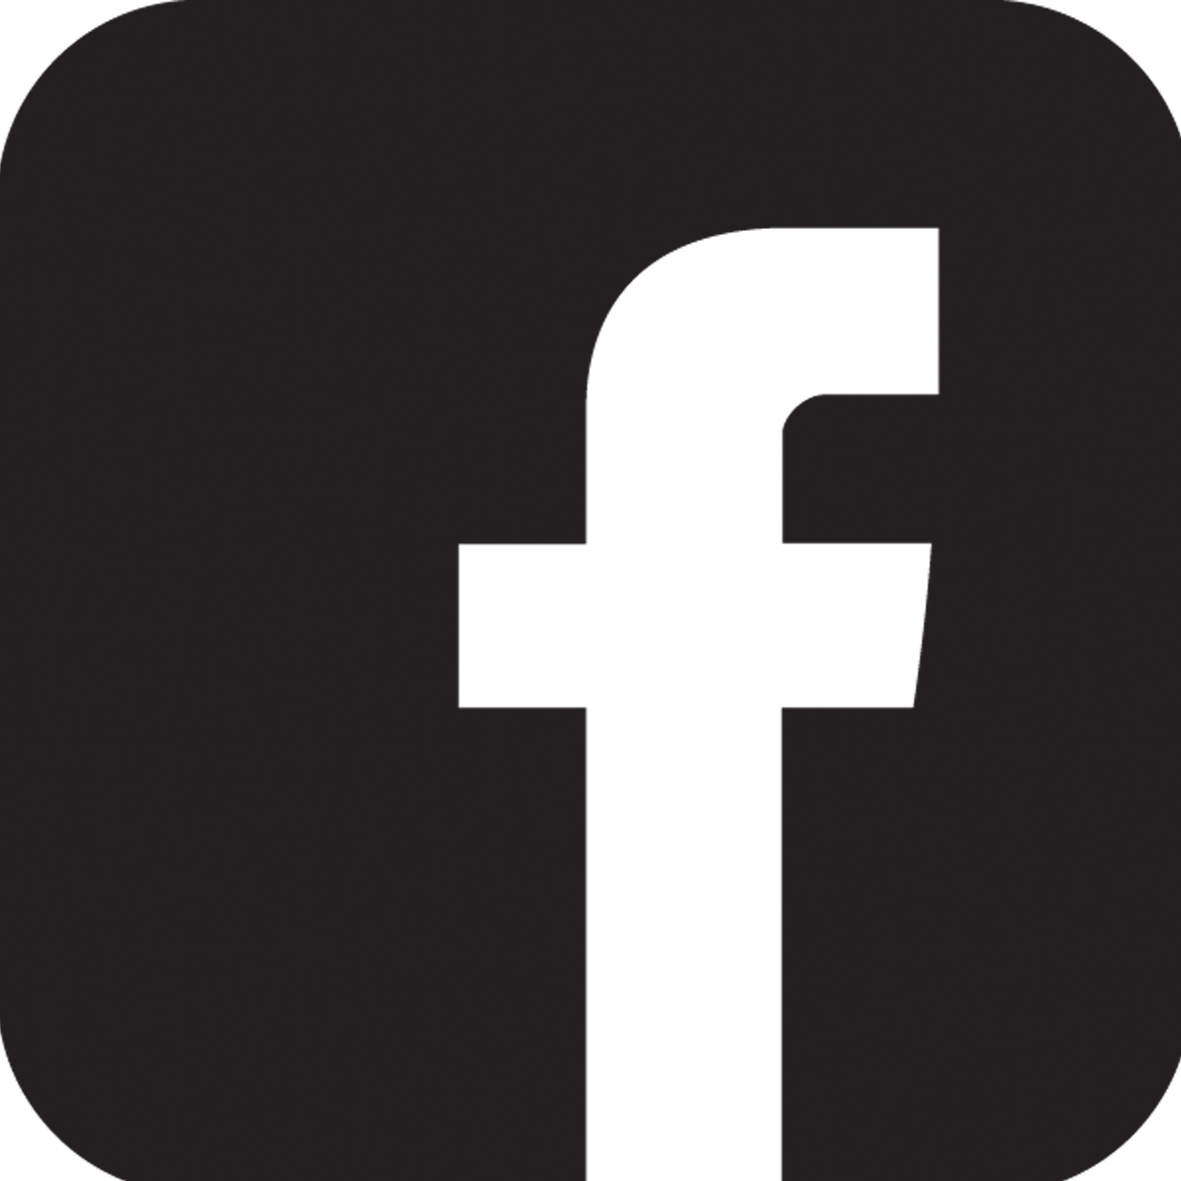 Download Foundation 3 Social Facebook Icon Style - Logo Facebook Png Noir  PNG Image with No Background - PNGkey.com